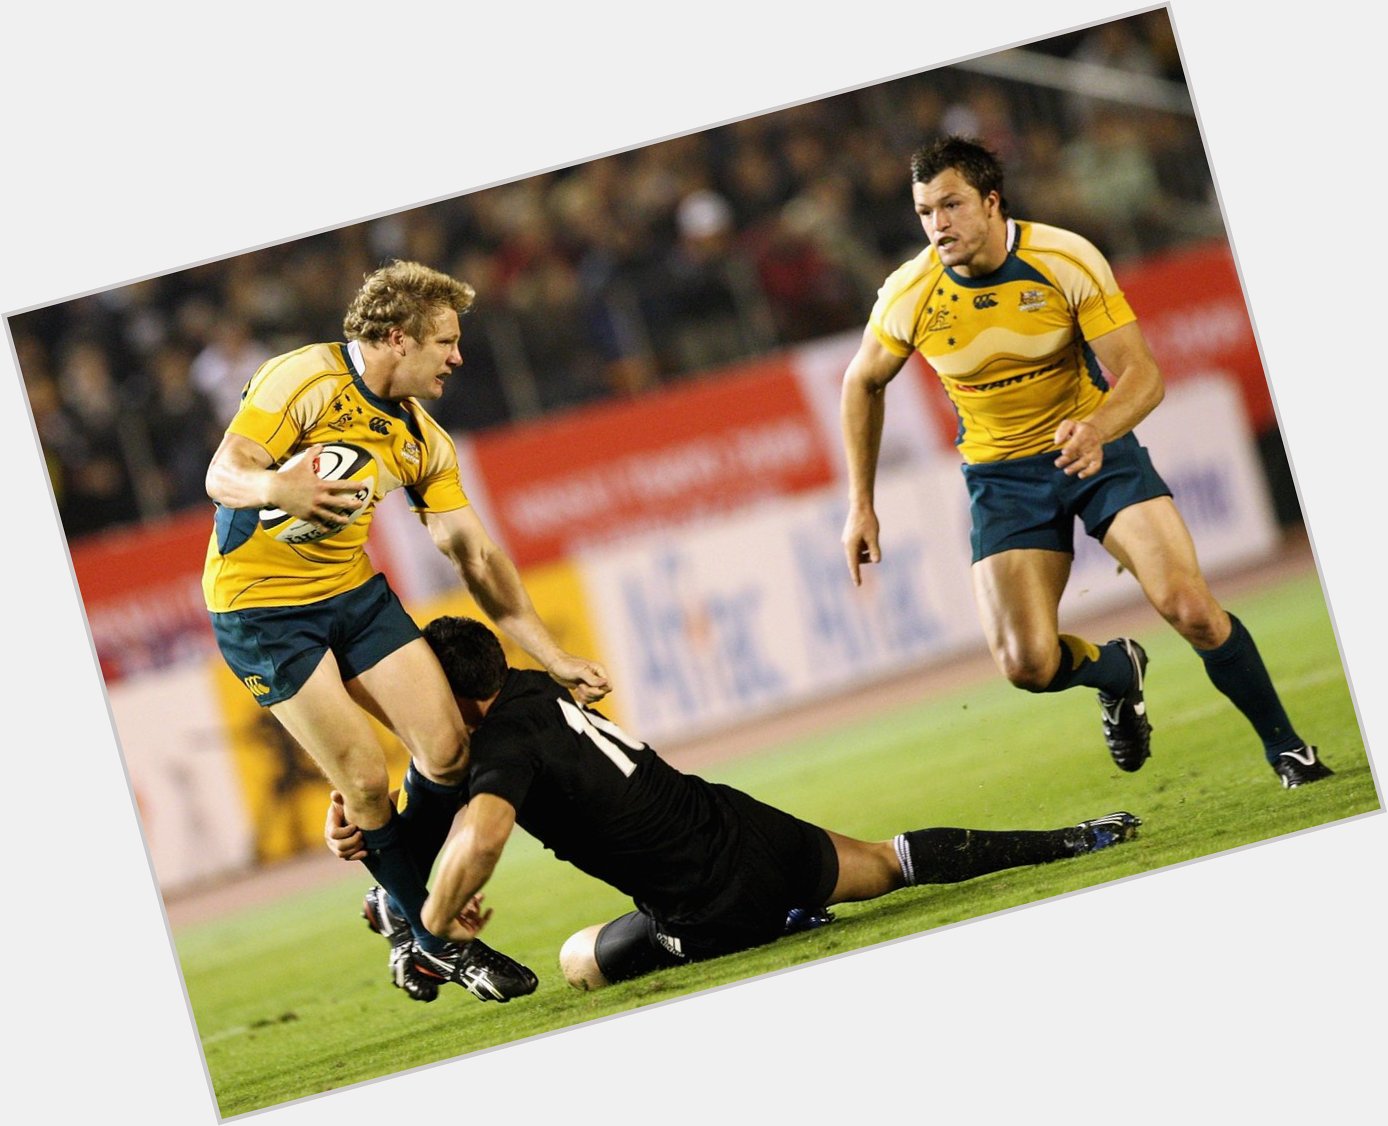 Happy birthday to Wallaby No. 822 Peter Hynes, who made his Test debut vs. Ireland in Melbourne (2008). 